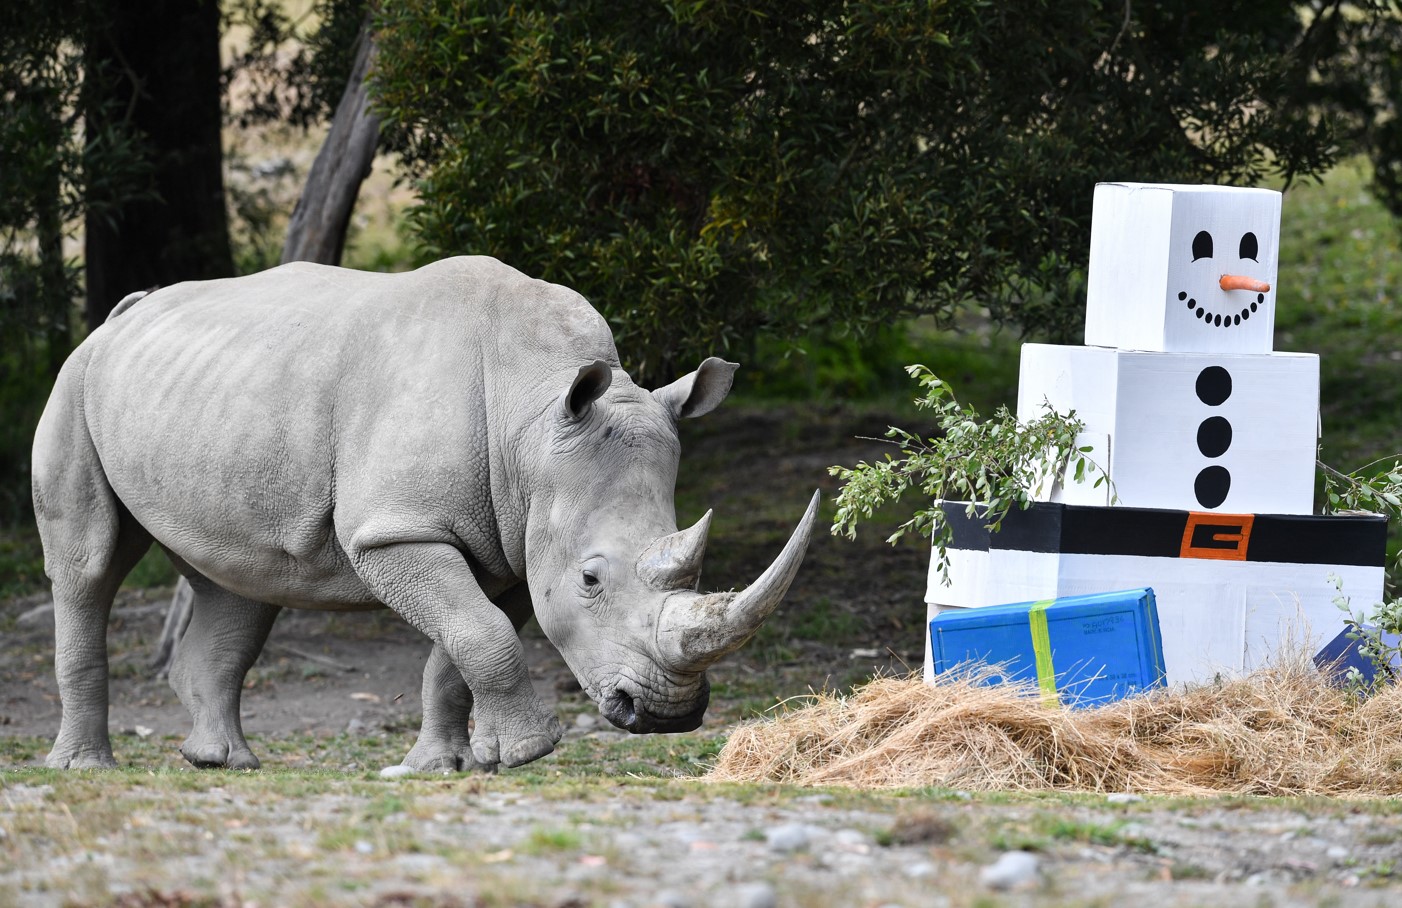 Scientists reveal IVF breakthrough that could save rhino species